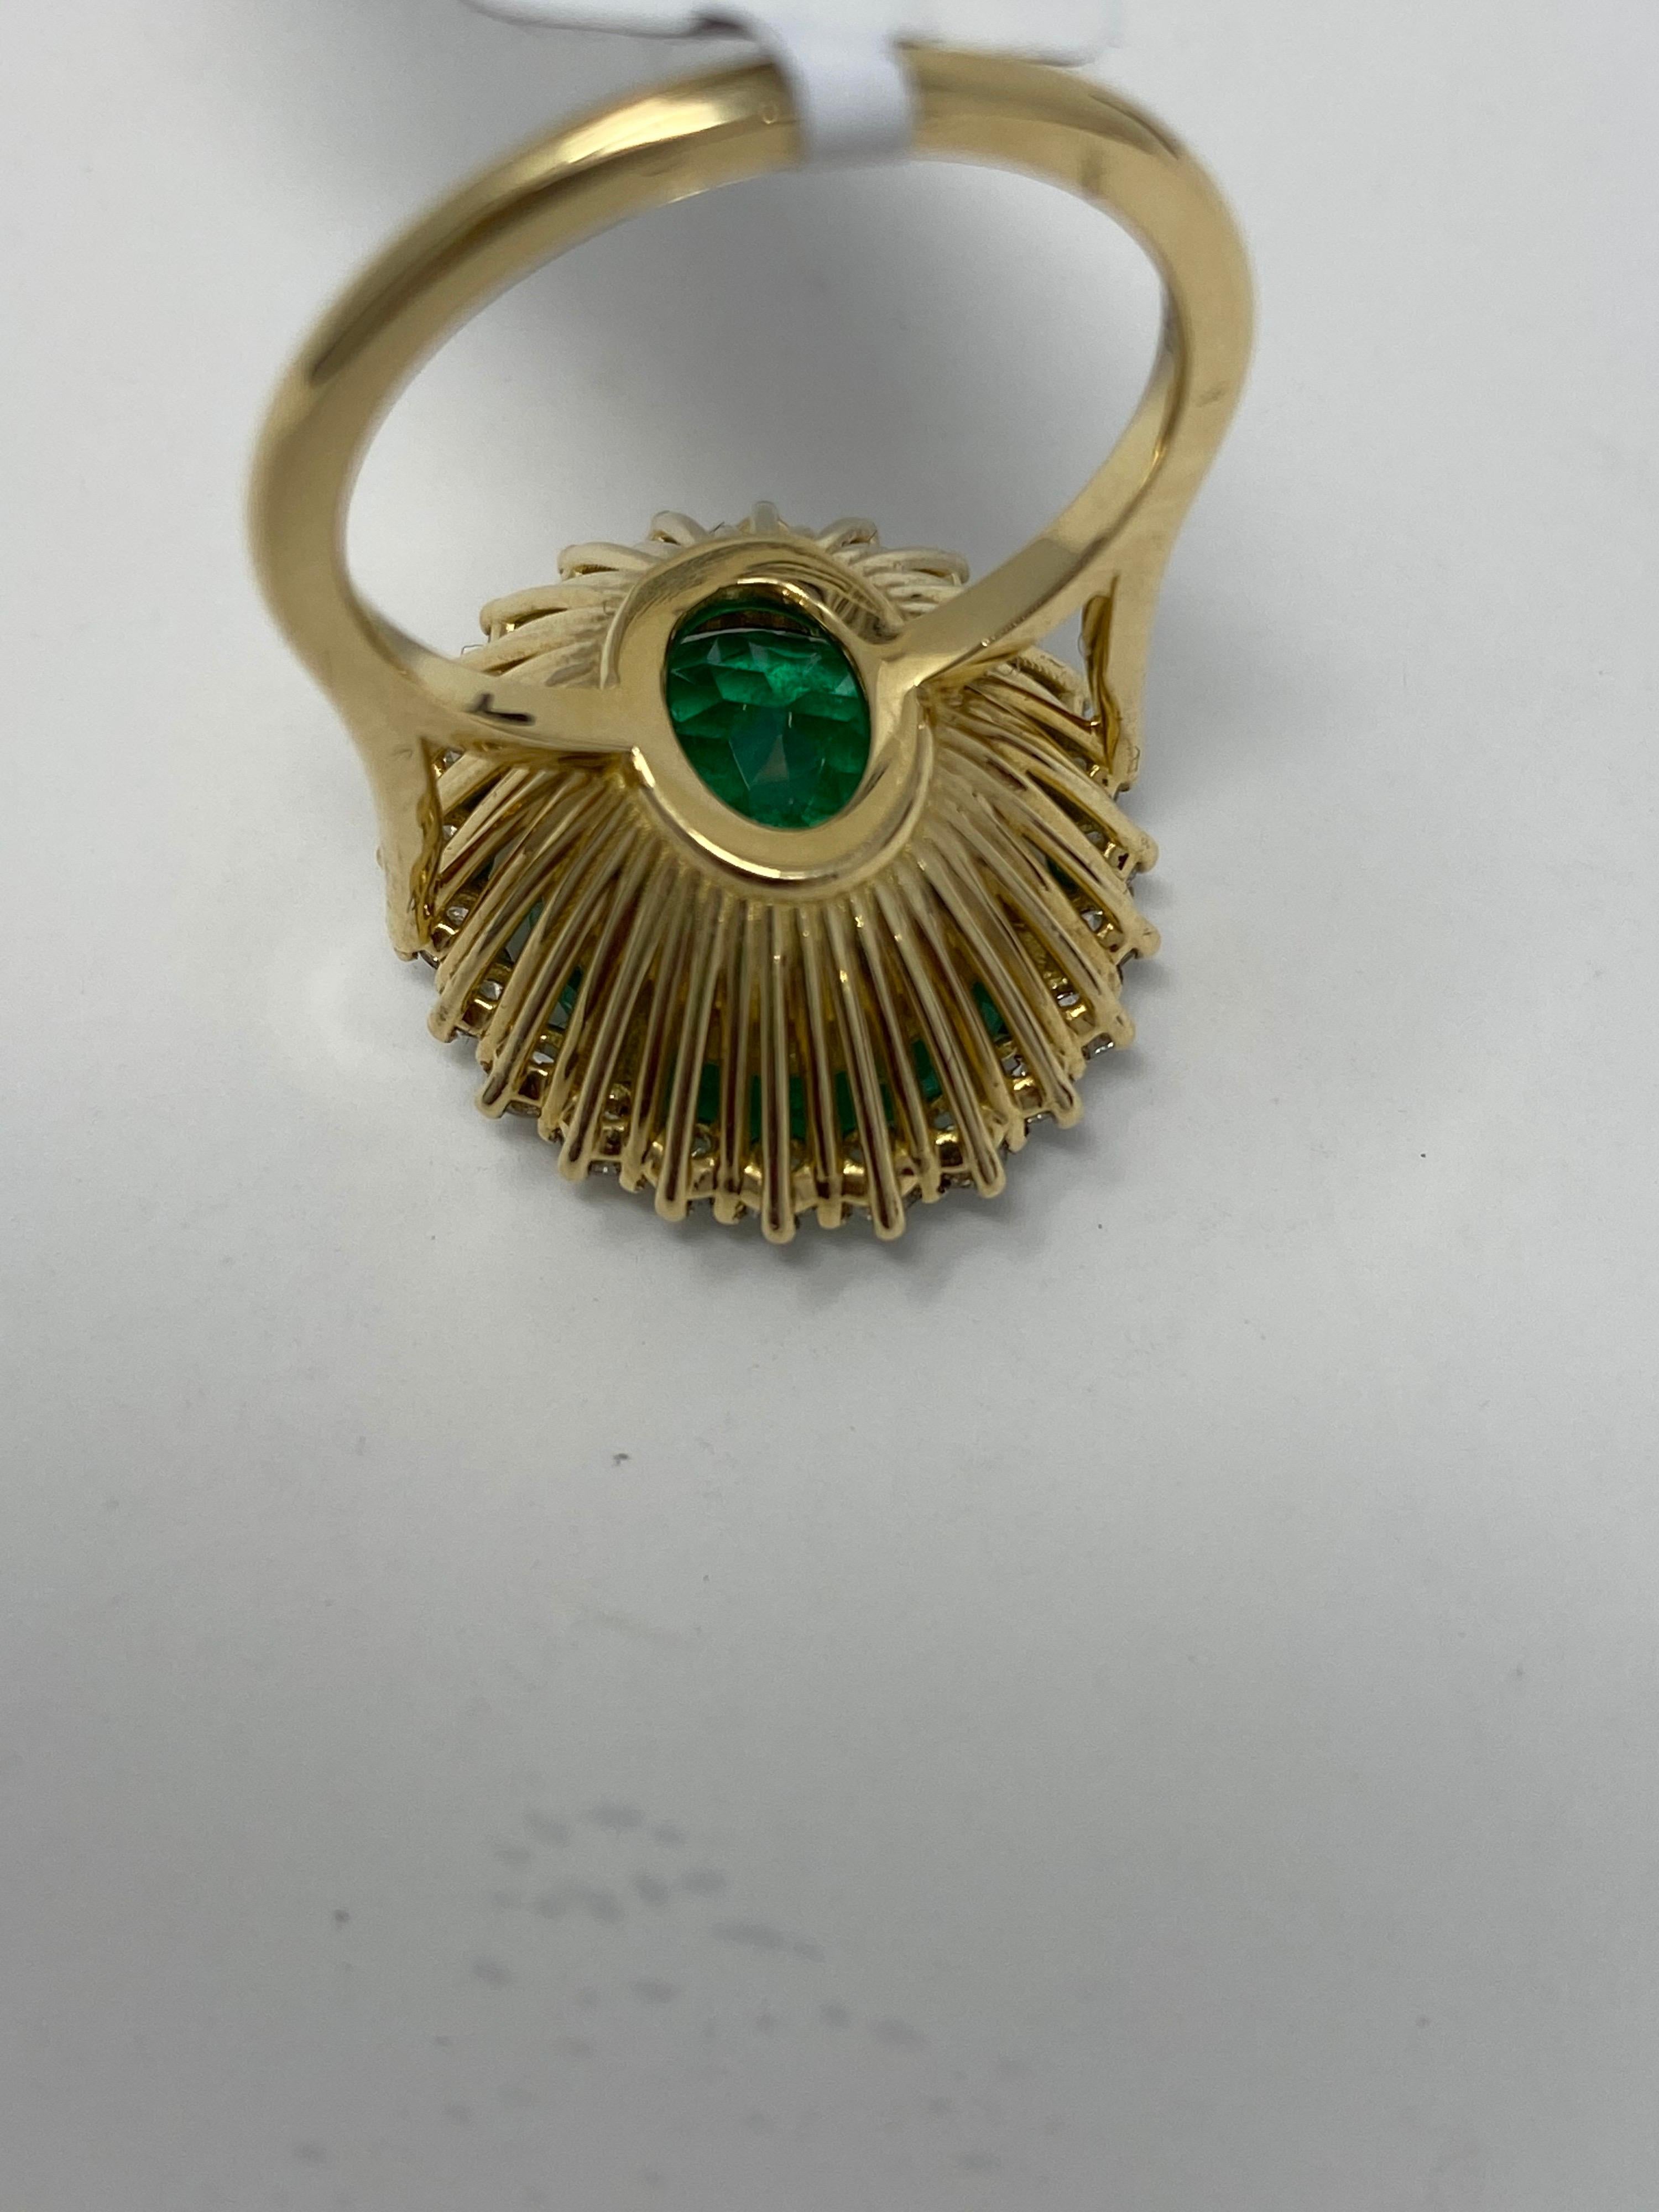 Columbian Emerald and Diamonds Halo Ring. Emerald is oval shaped 7.64 ct with 1.00ct of diamonds. Set in 18 kt yellow gold. Total weight of ring is 8.40gm. Full appraisal and GIA report included. Appraised at $42,500.  Absolutely gorgeous ring.